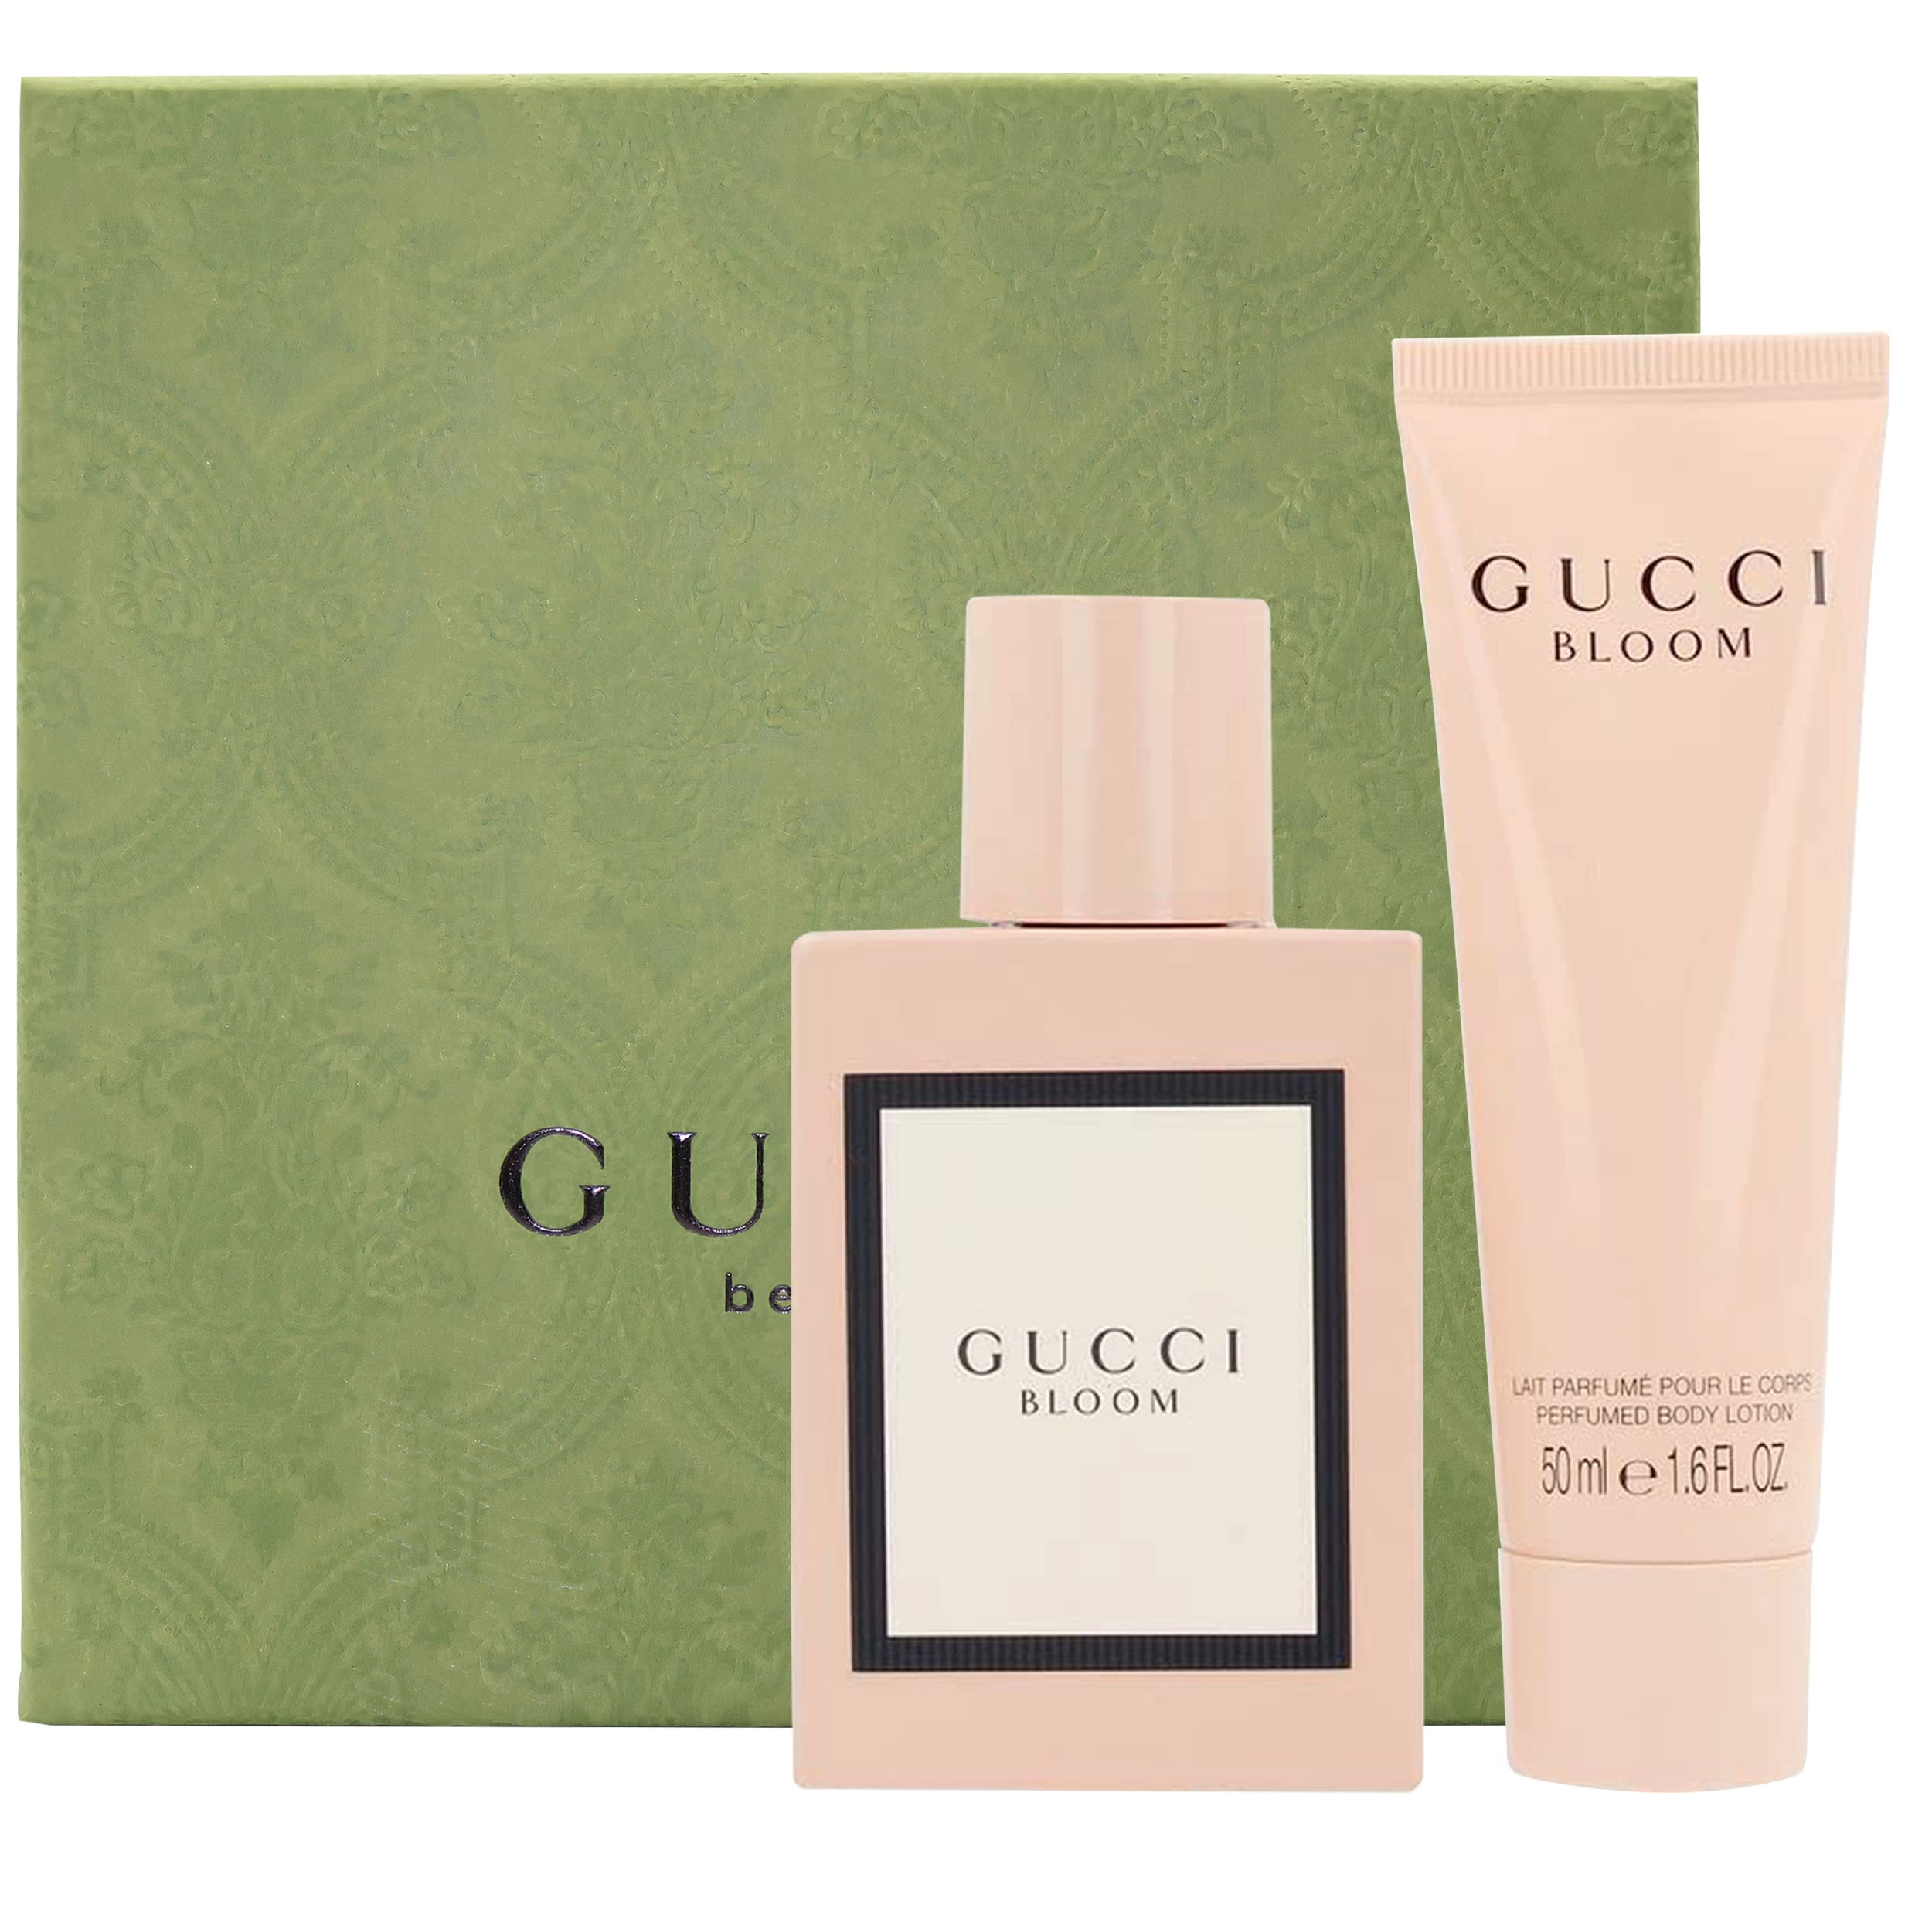 Mua Gucci Bloom Eau De Parfum and Scented Lotion Gift Set - 50 ml Gucci  Perfume for Women and 50 ml Scented Lotion - Perfumes for Women - Notes of  Rangoon Creeper,